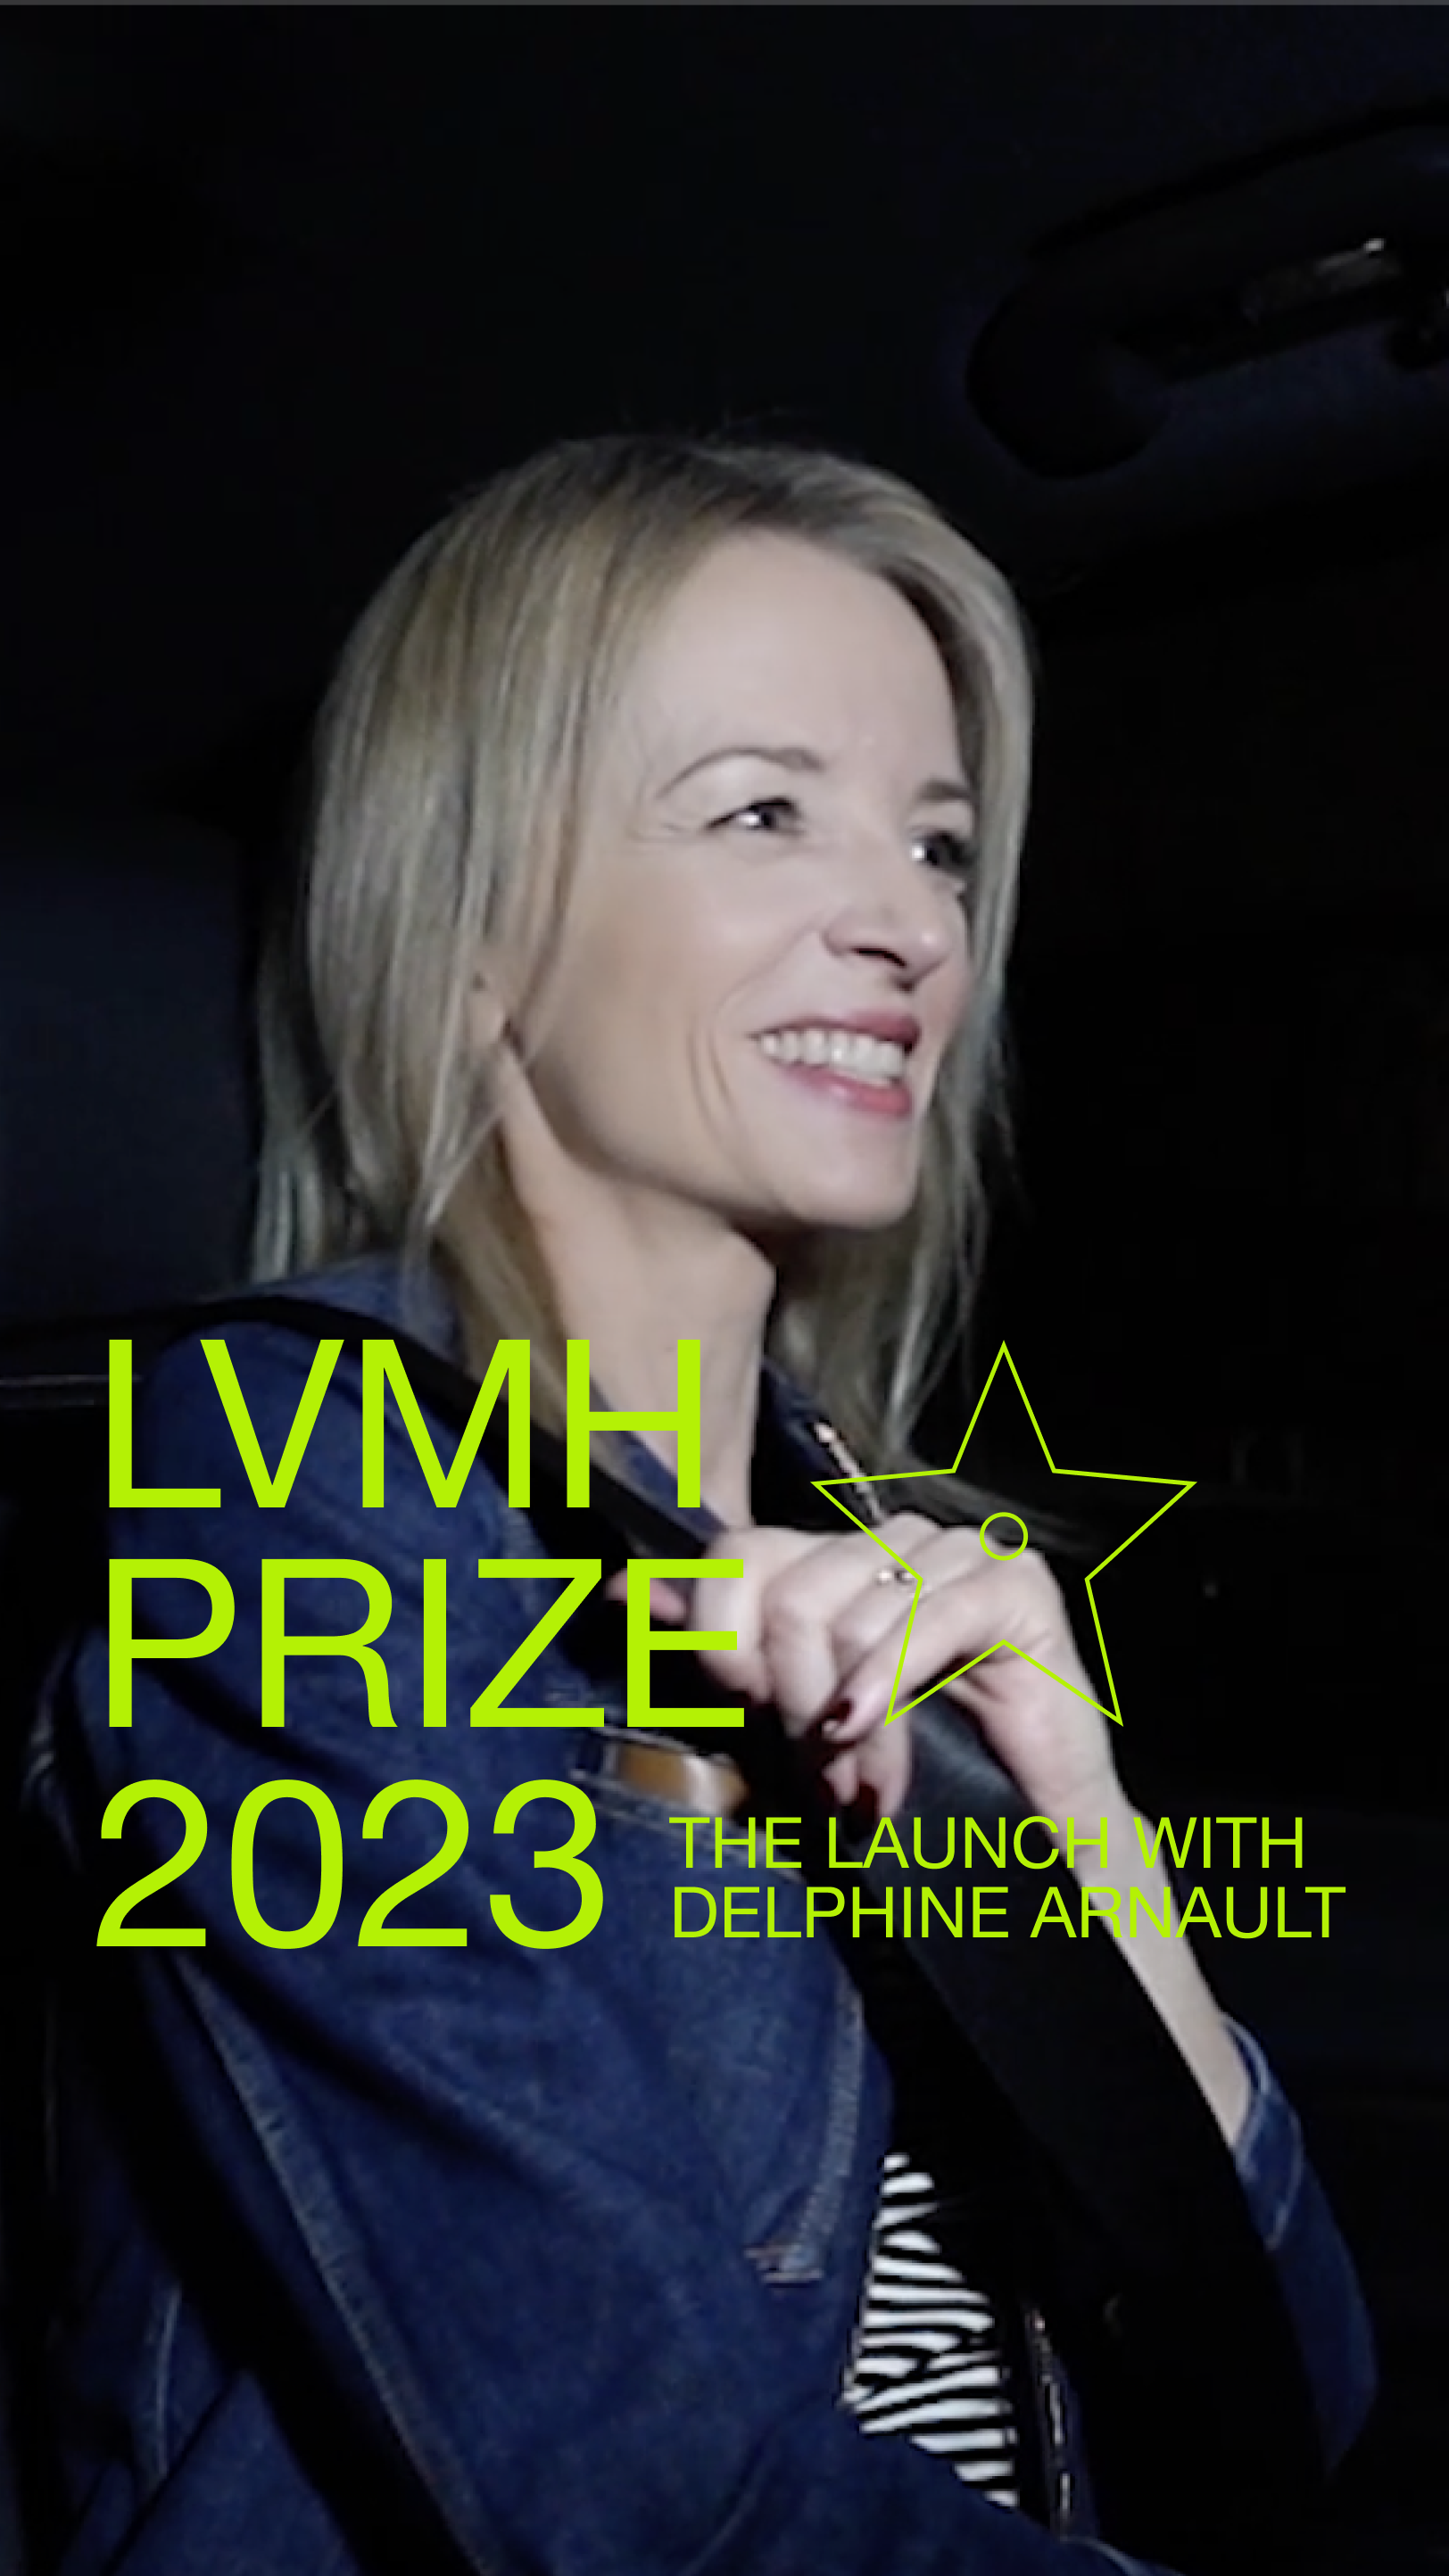 LVMH Is Looking For Fresh Fashion Designers For Their 10th LVMH Prize